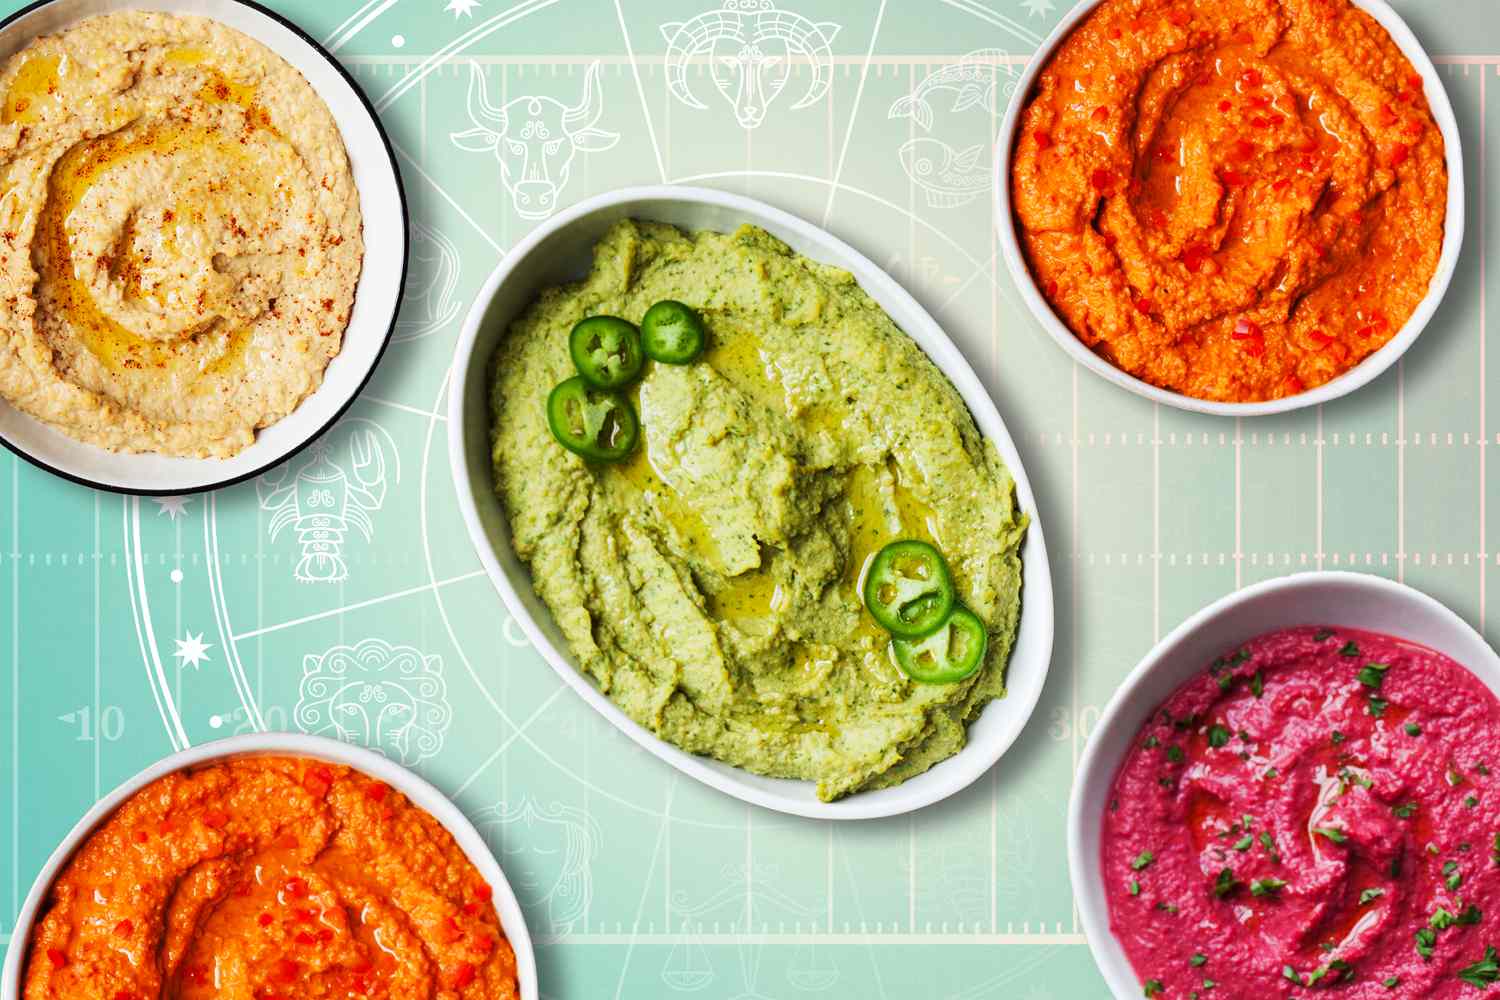 The Best Super Bowl Food for Your Zodiac Sign, According to an Astrologer